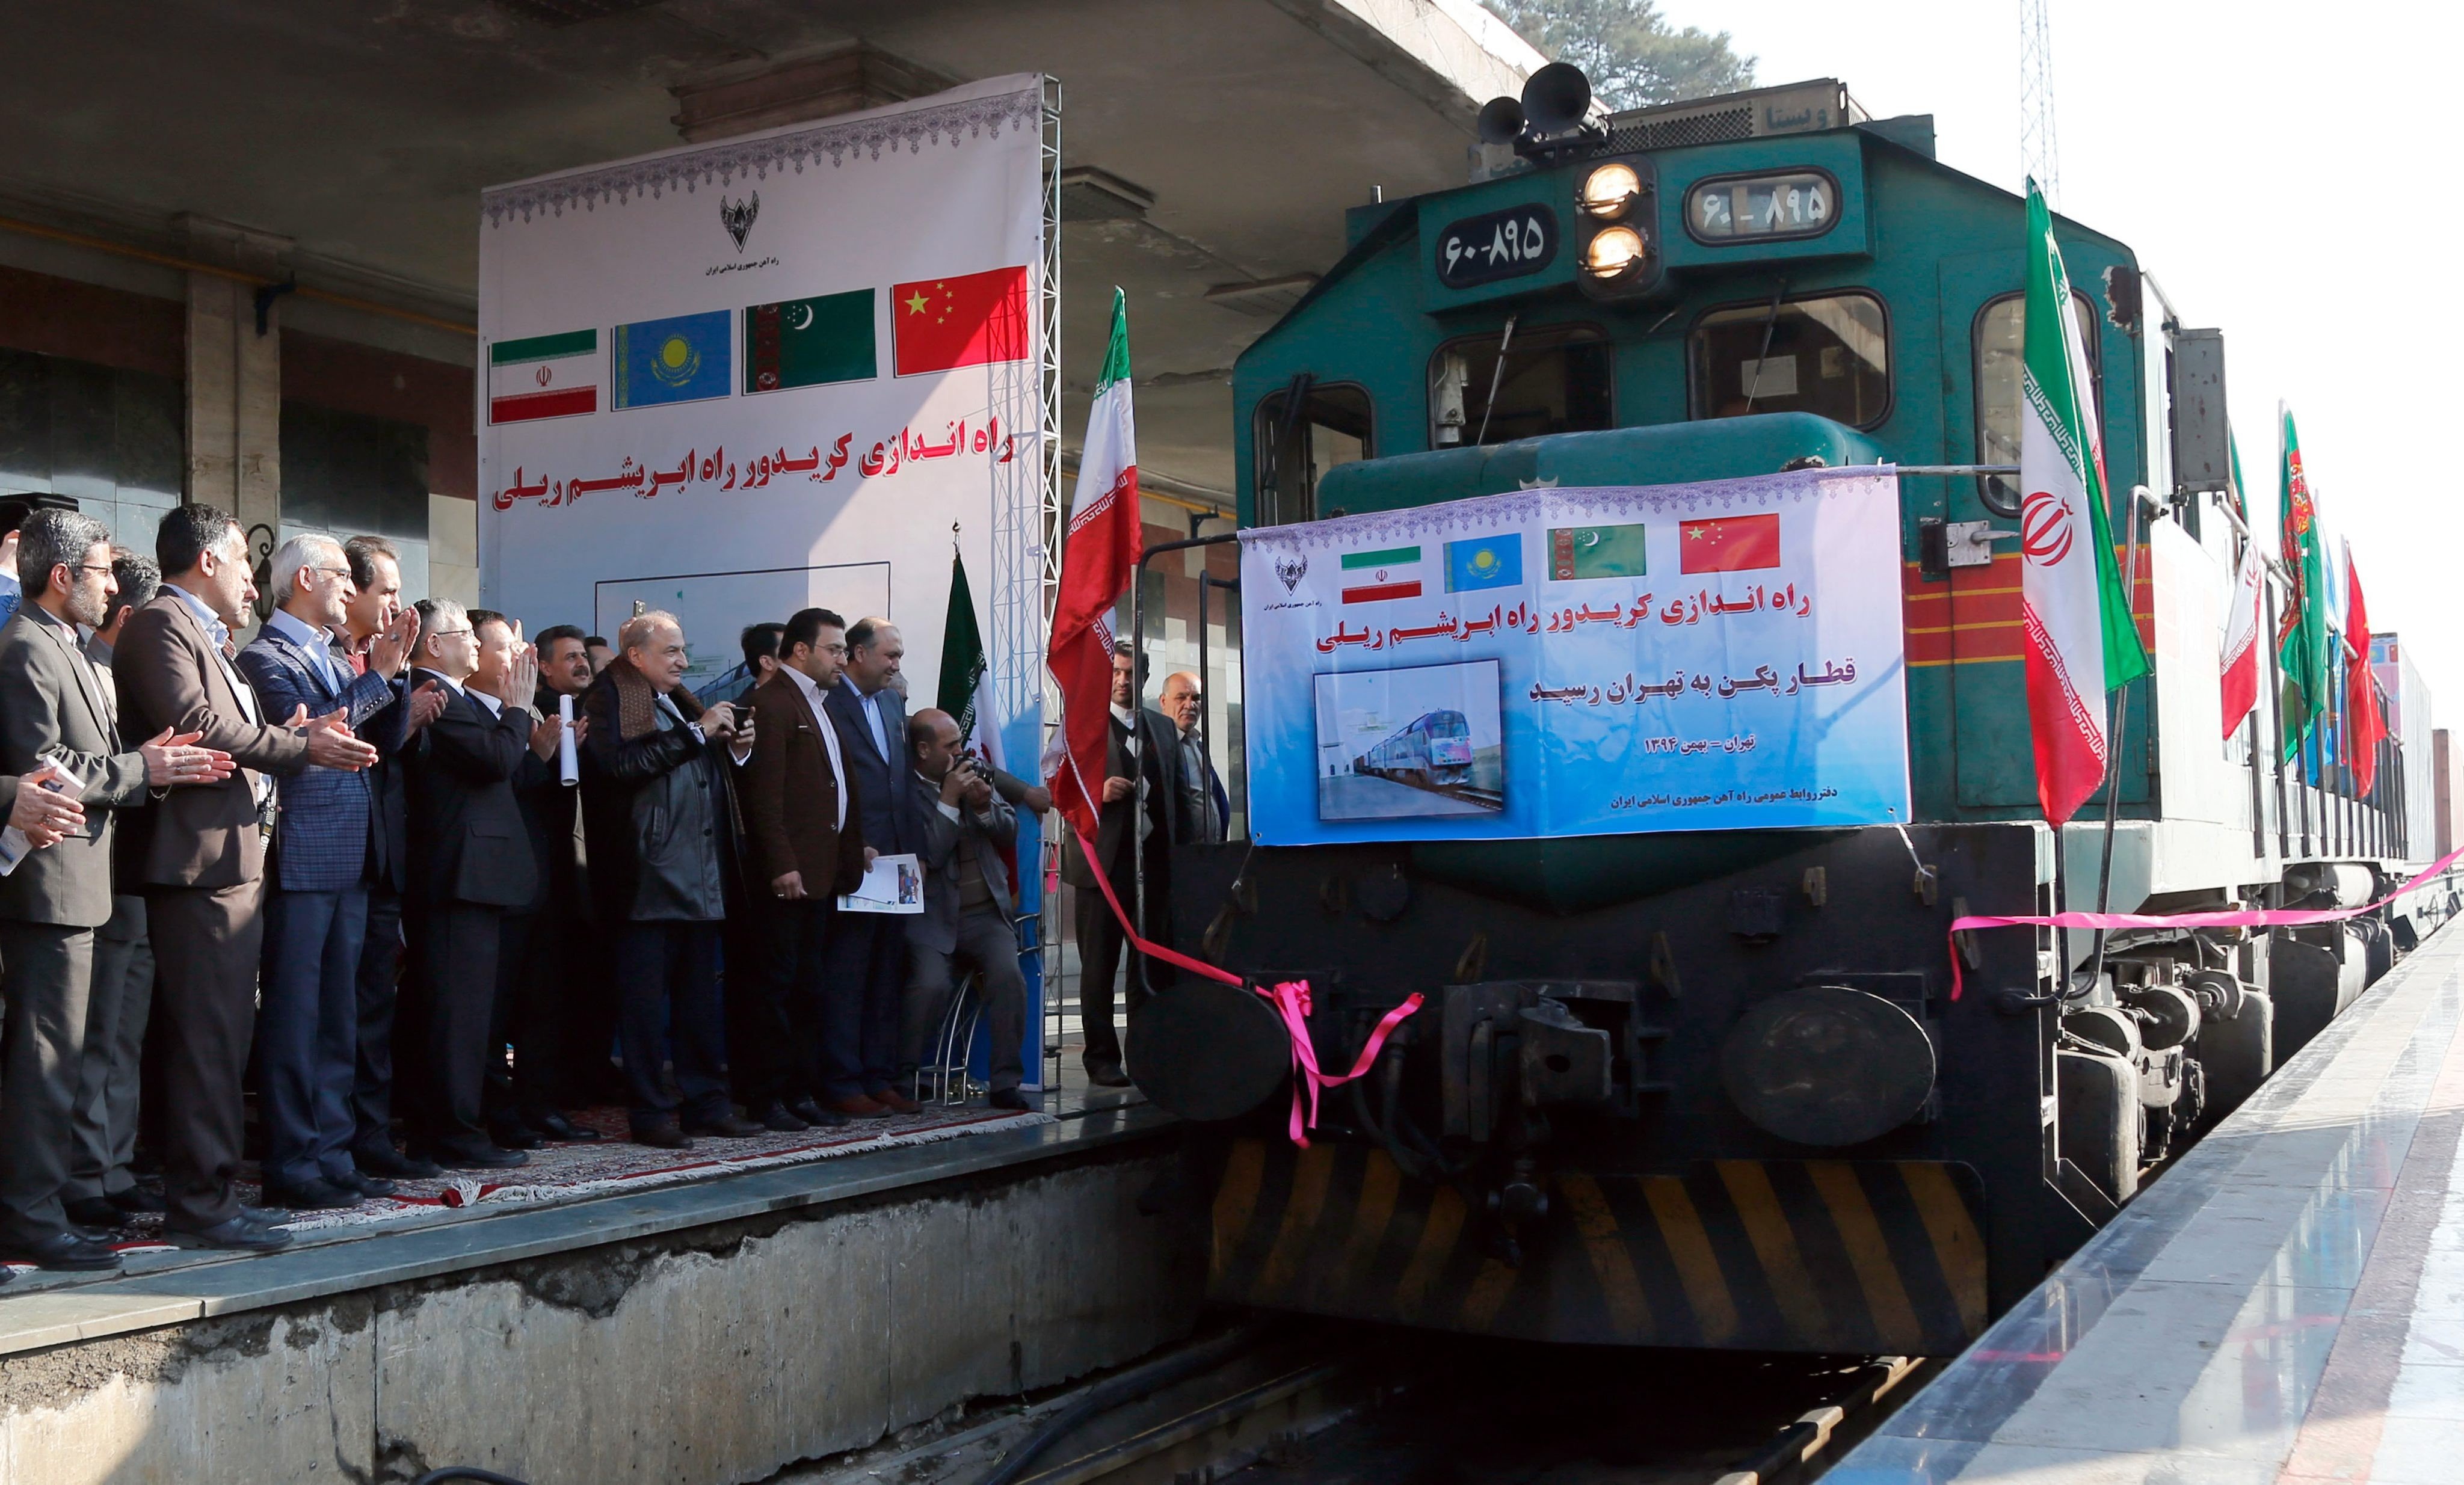 The first-ever Chinese goods train to Iran arrives in Tehran on February 15, 2016, after a 14-day journey hailed as a revival of the Silk Road under China’s Belt and Road Initiative. China is emerging as the central power in its immediate and expanding neighbourhood, while the West tears at itself and old alliances. Photo: EPA